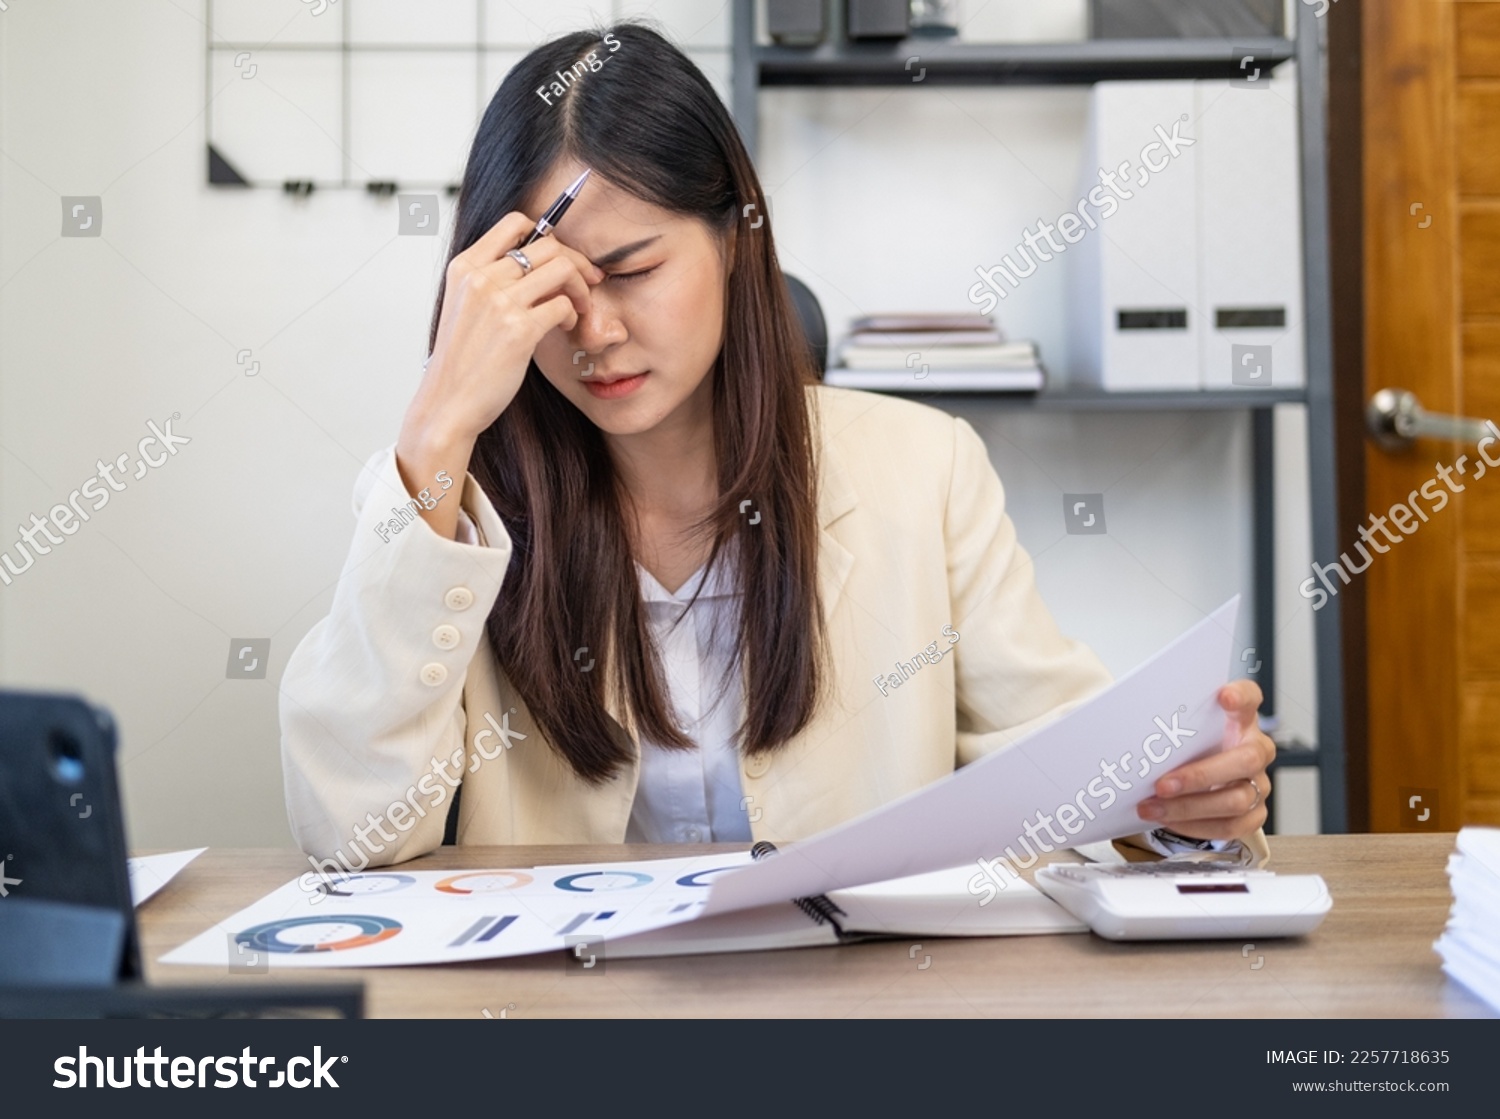 Tired teen girl rubbing dry irritable eyes feel eye strain tension migraine after computer work, exhausted young Asian woman student relieving headache pain, bad weak blurry vision, eyesight problem #2257718635